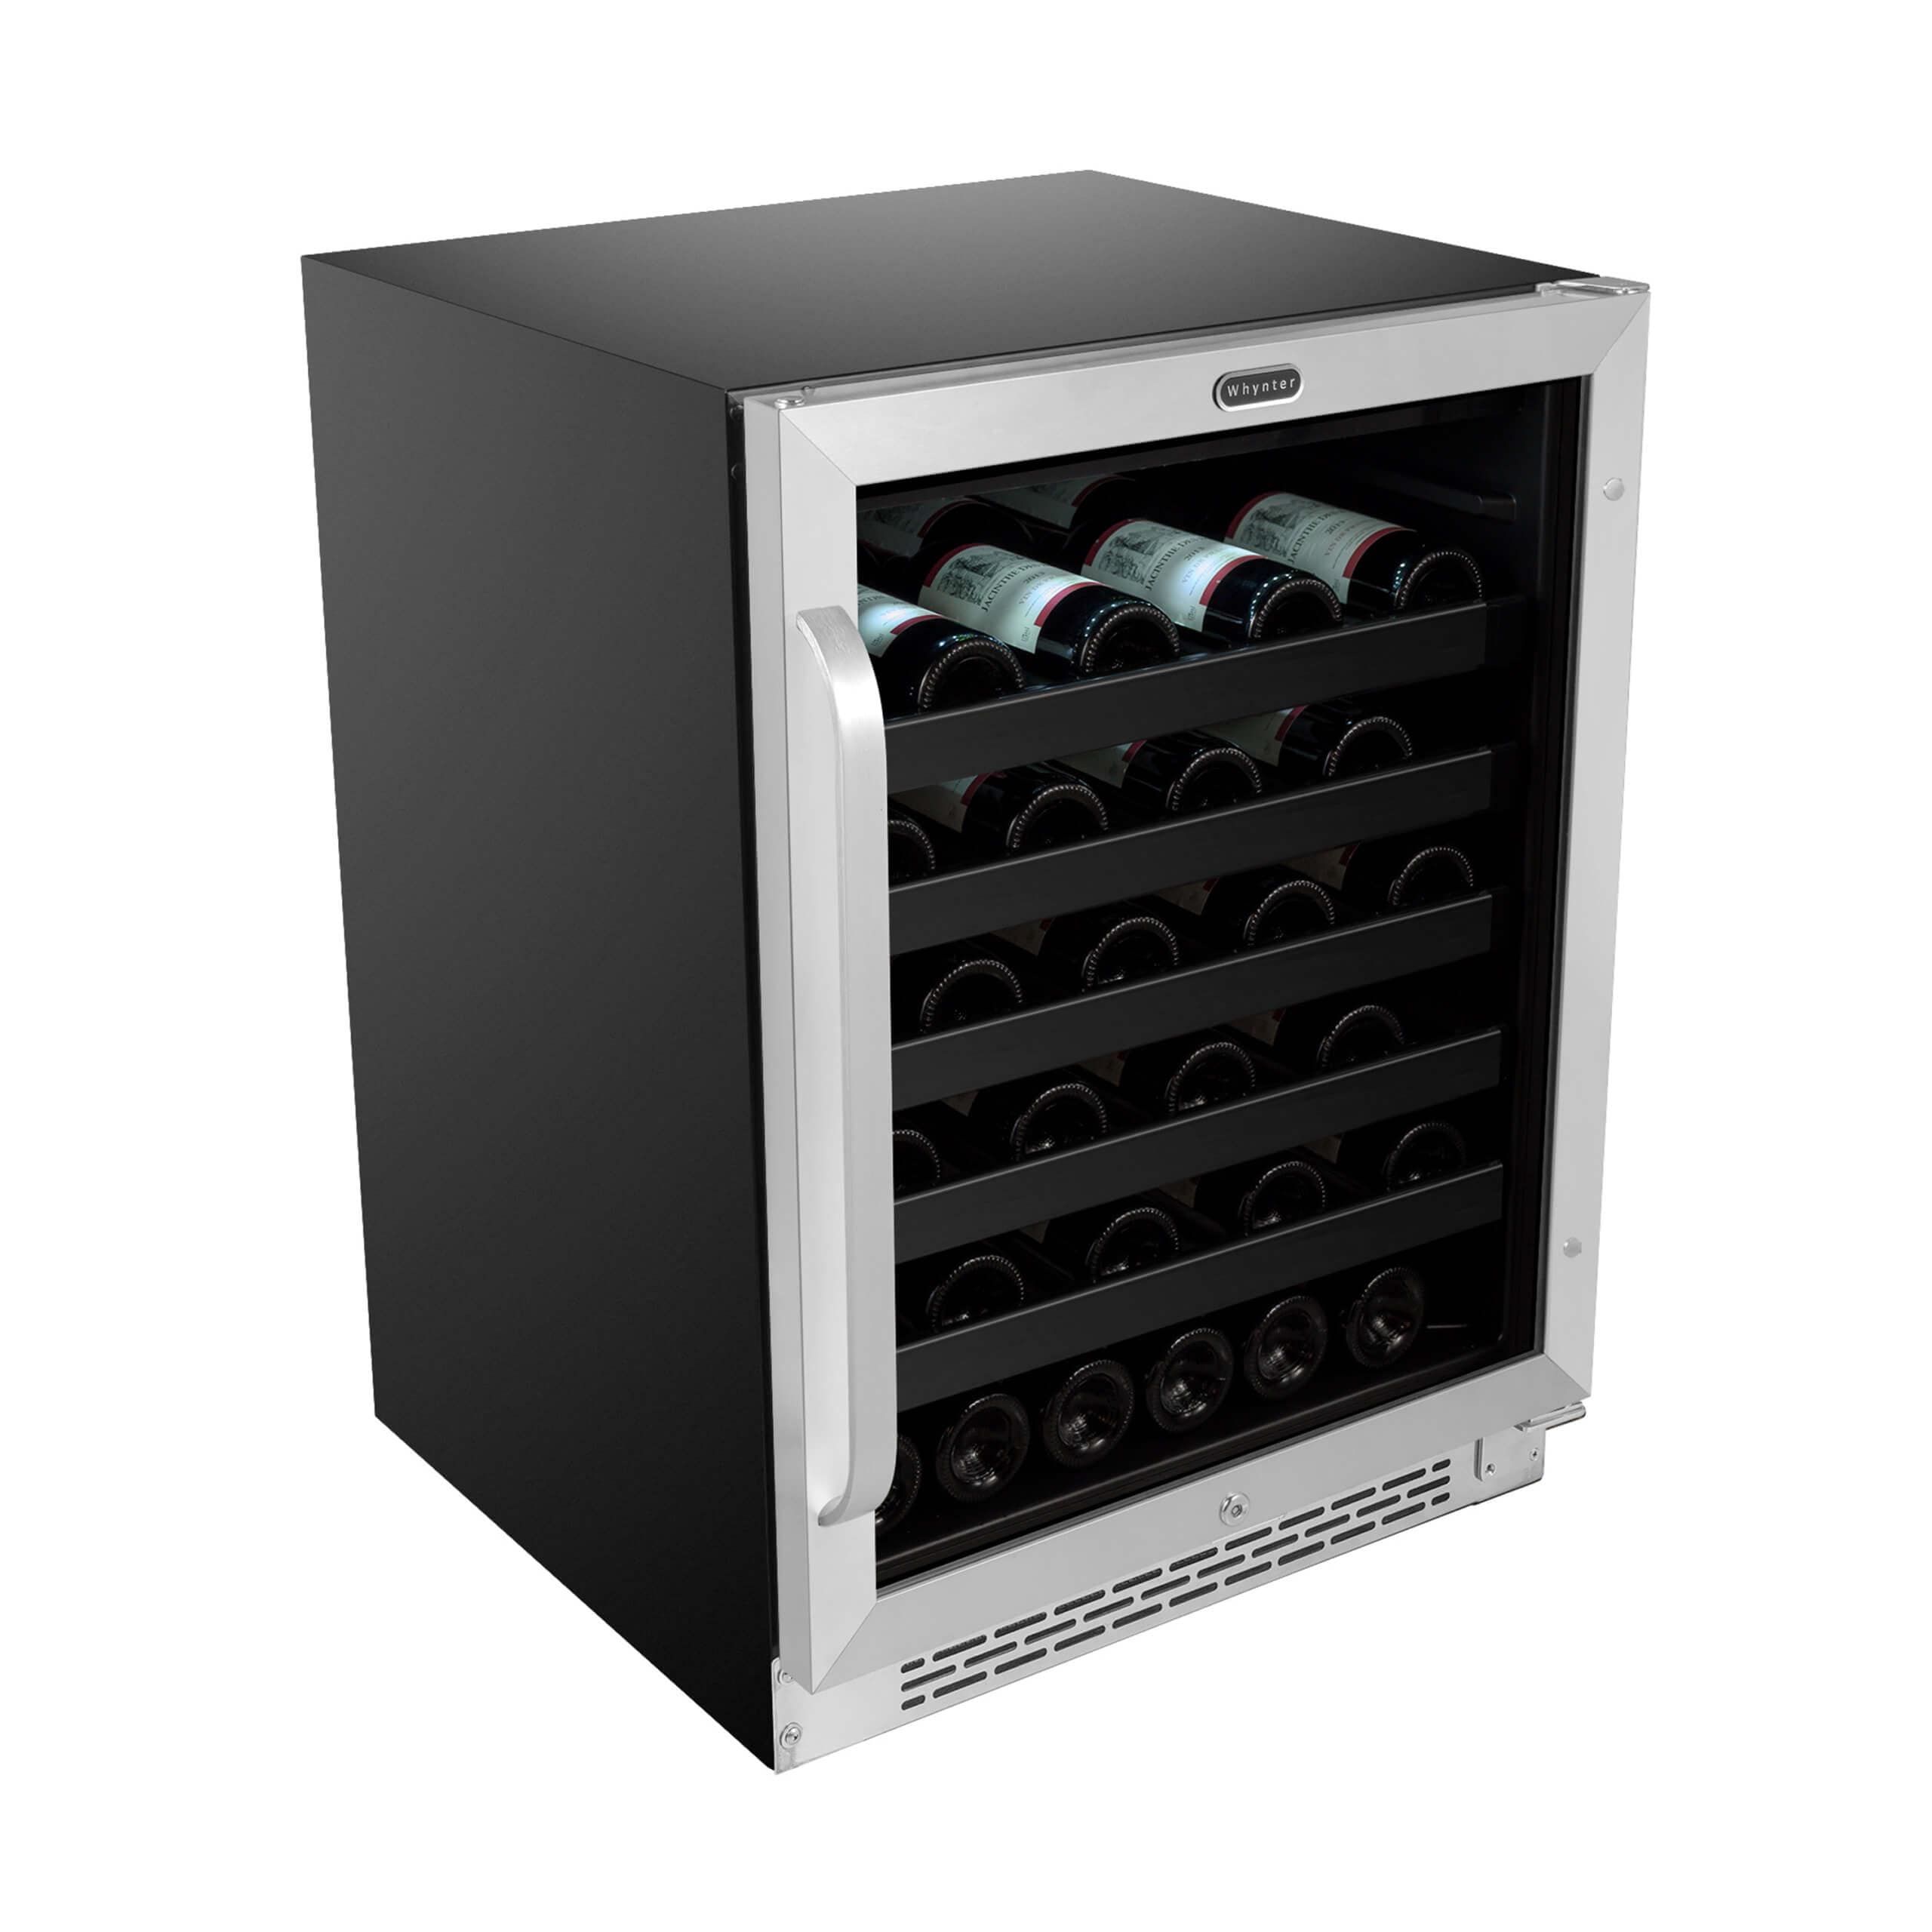 Whynter Whynter BWR-408SB 24 inch Built-In 46 Bottle Undercounter Stainless Steel Wine Refrigerator with Reversible Door, Digital Control, Lock and Carbon Filter